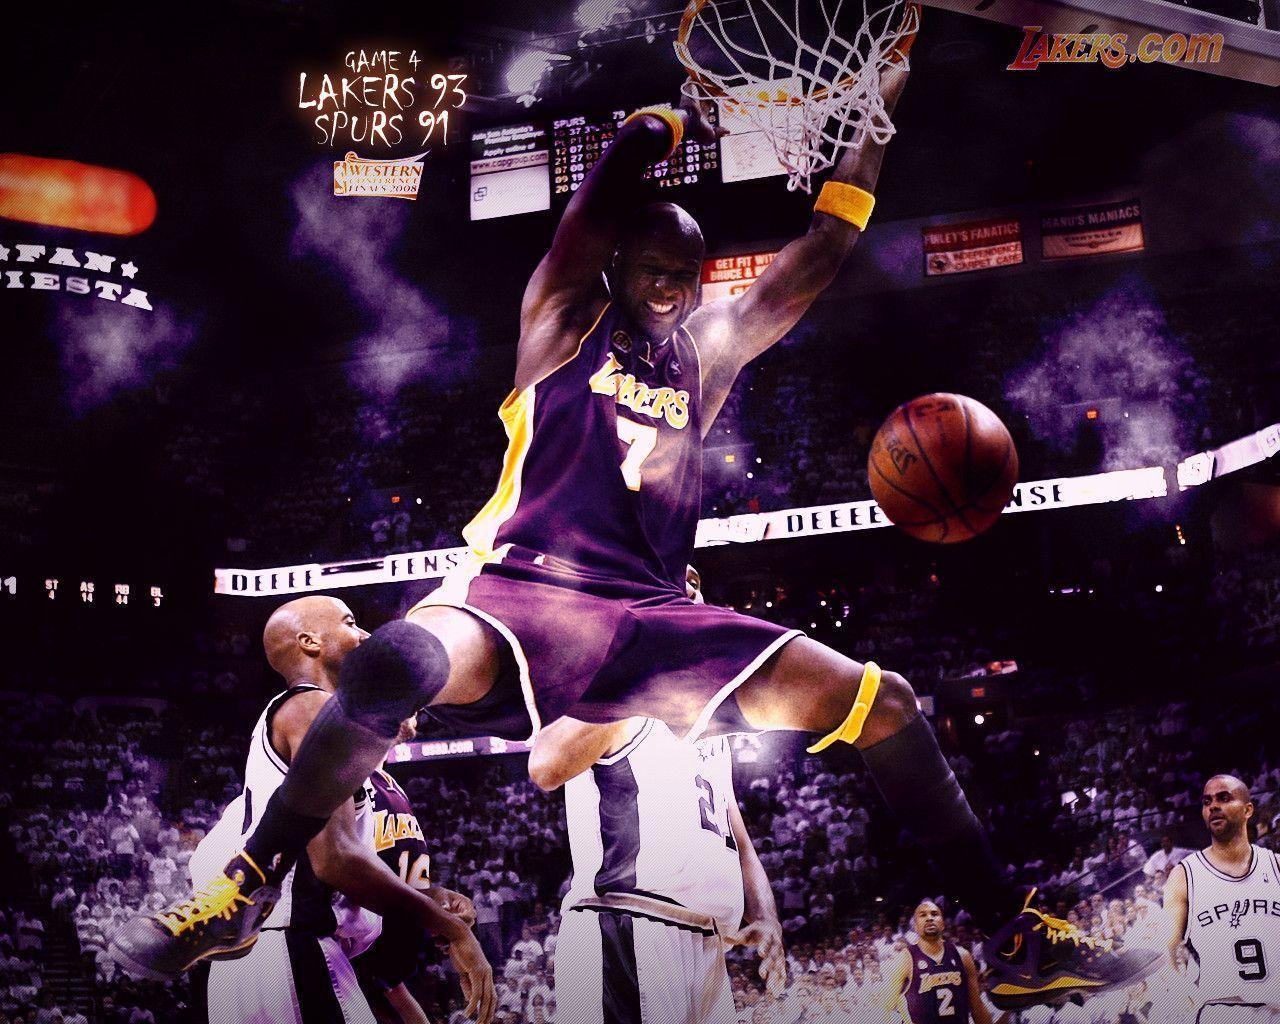 Playoff Central. THE OFFICIAL SITE OF THE LOS ANGELES LAKERS